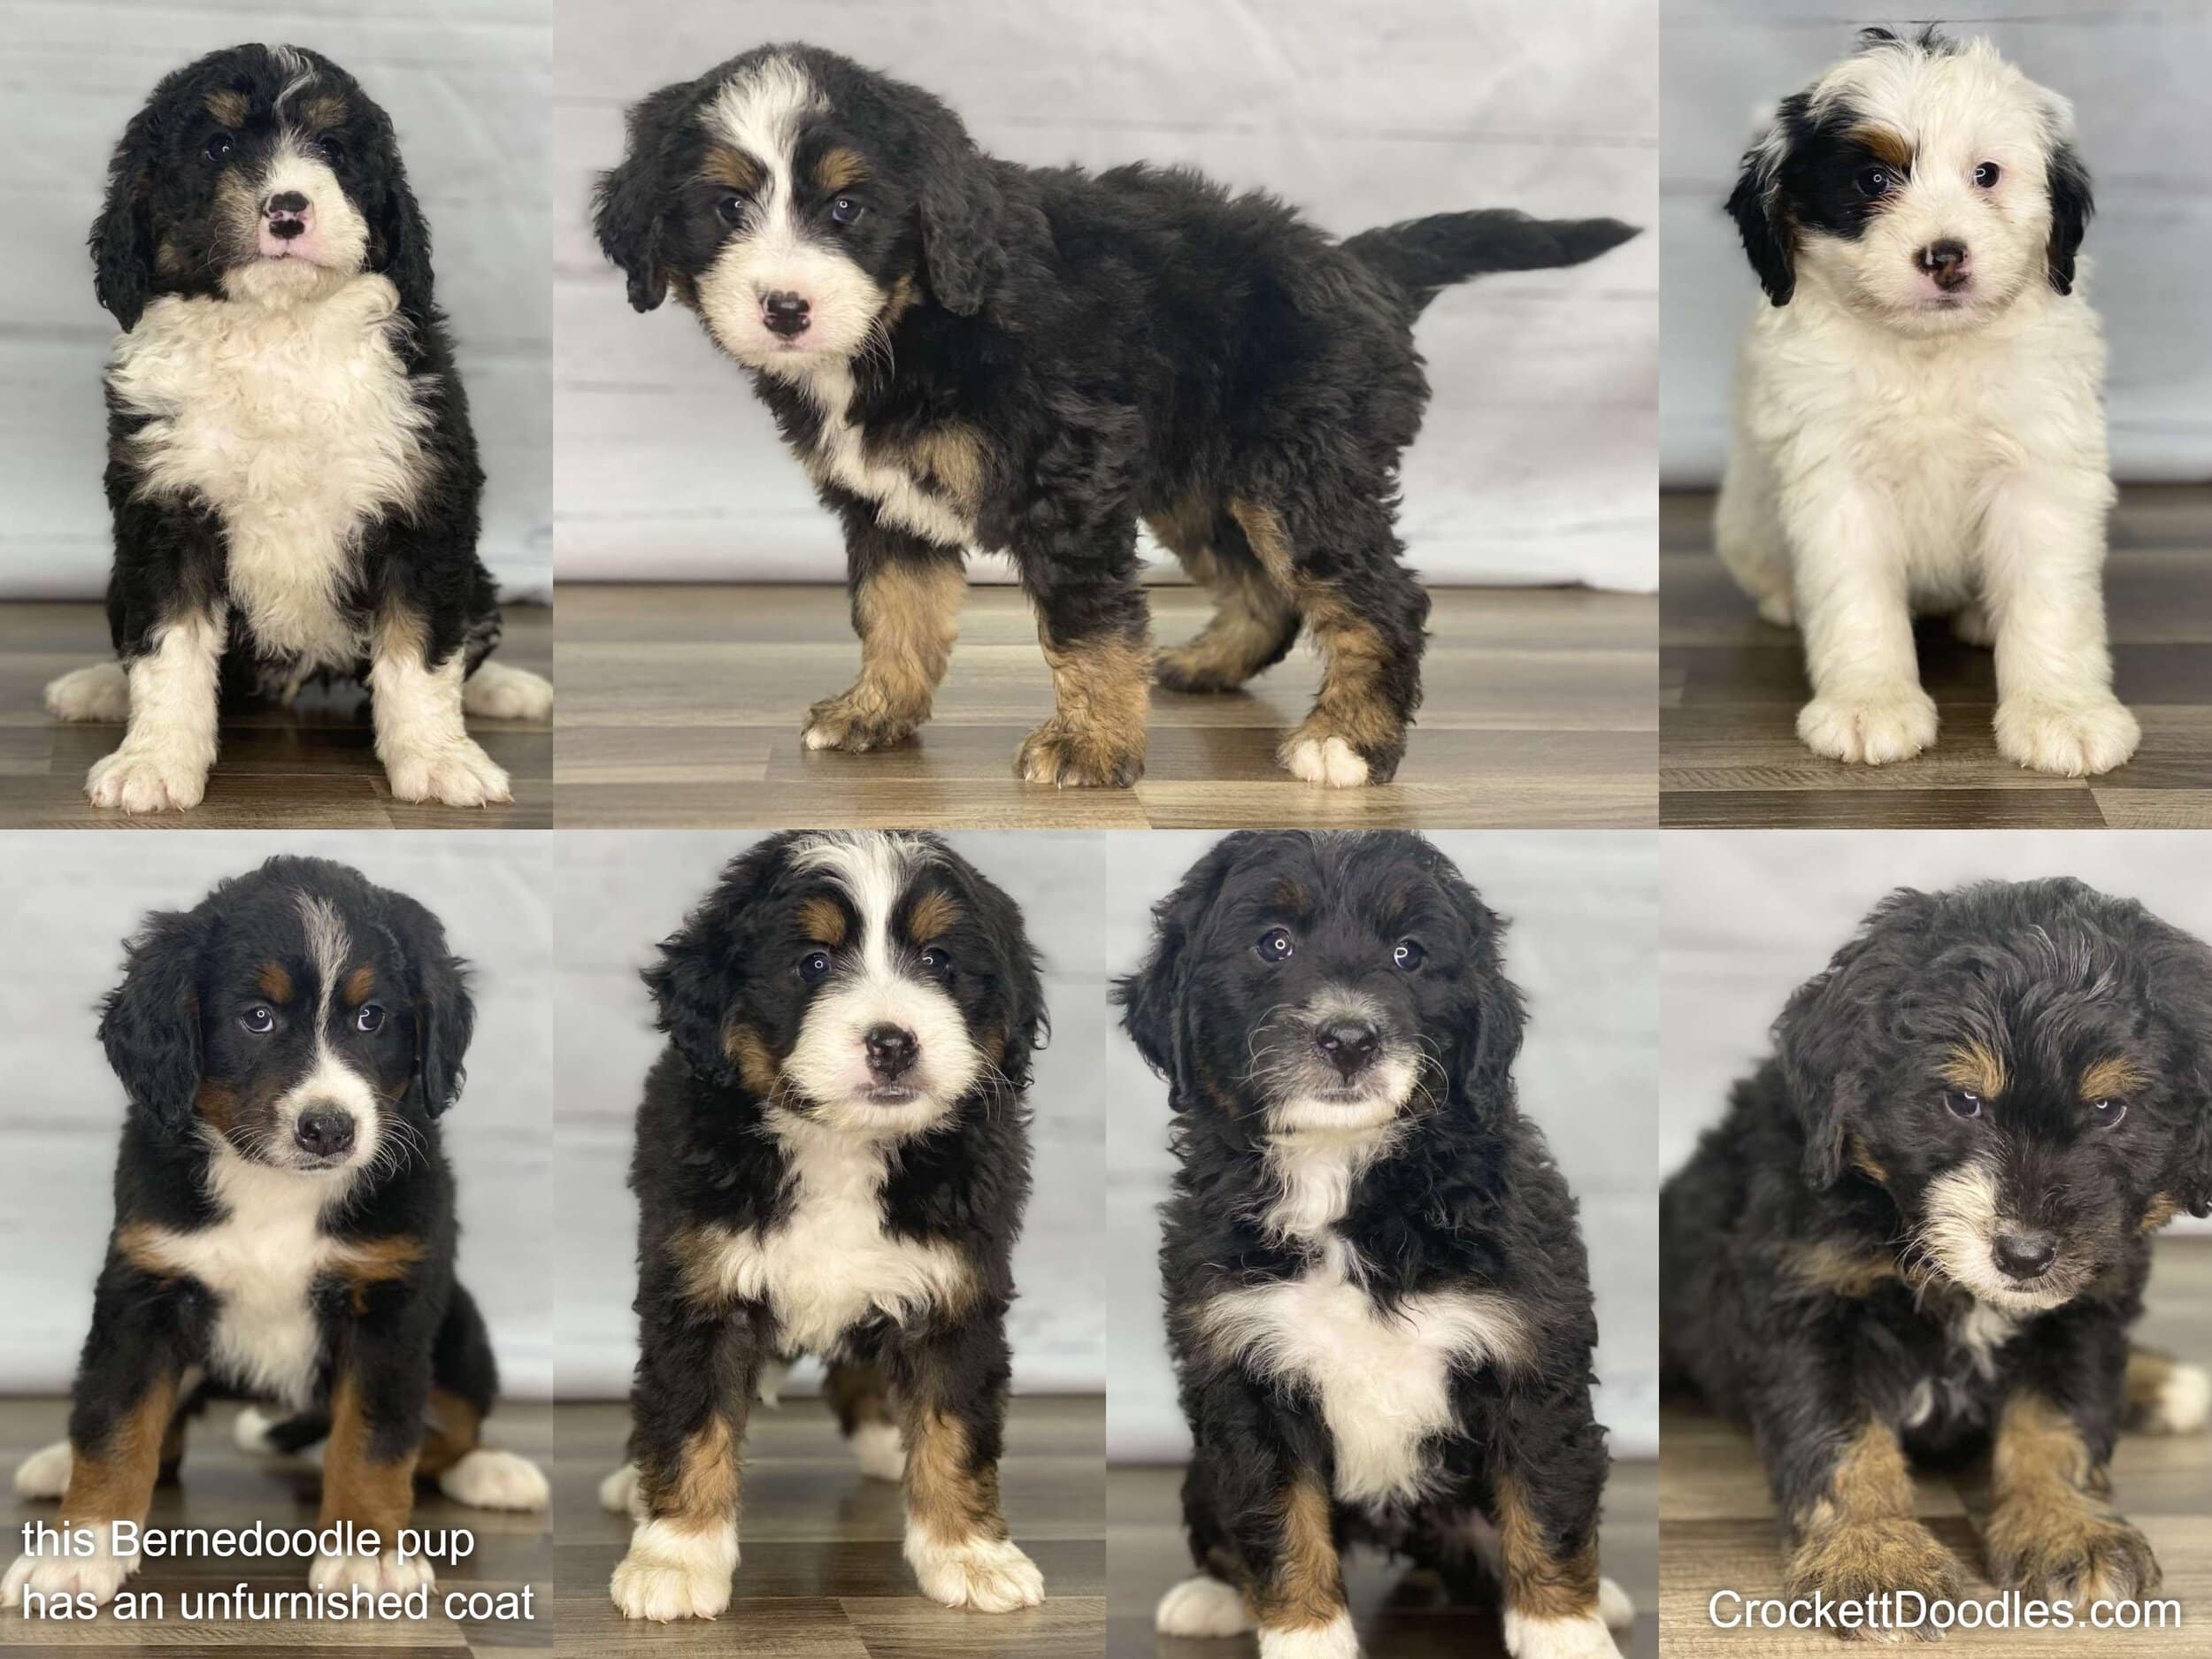 This litter of Bernedoodles had six pups with our normal furnished coats, and one boy (Lliam in the bottom left corner) that had an unfurnished coat. As they grow older, Lliam will look a lot like a purebred Bernese Mountain Dog, while his littermat…